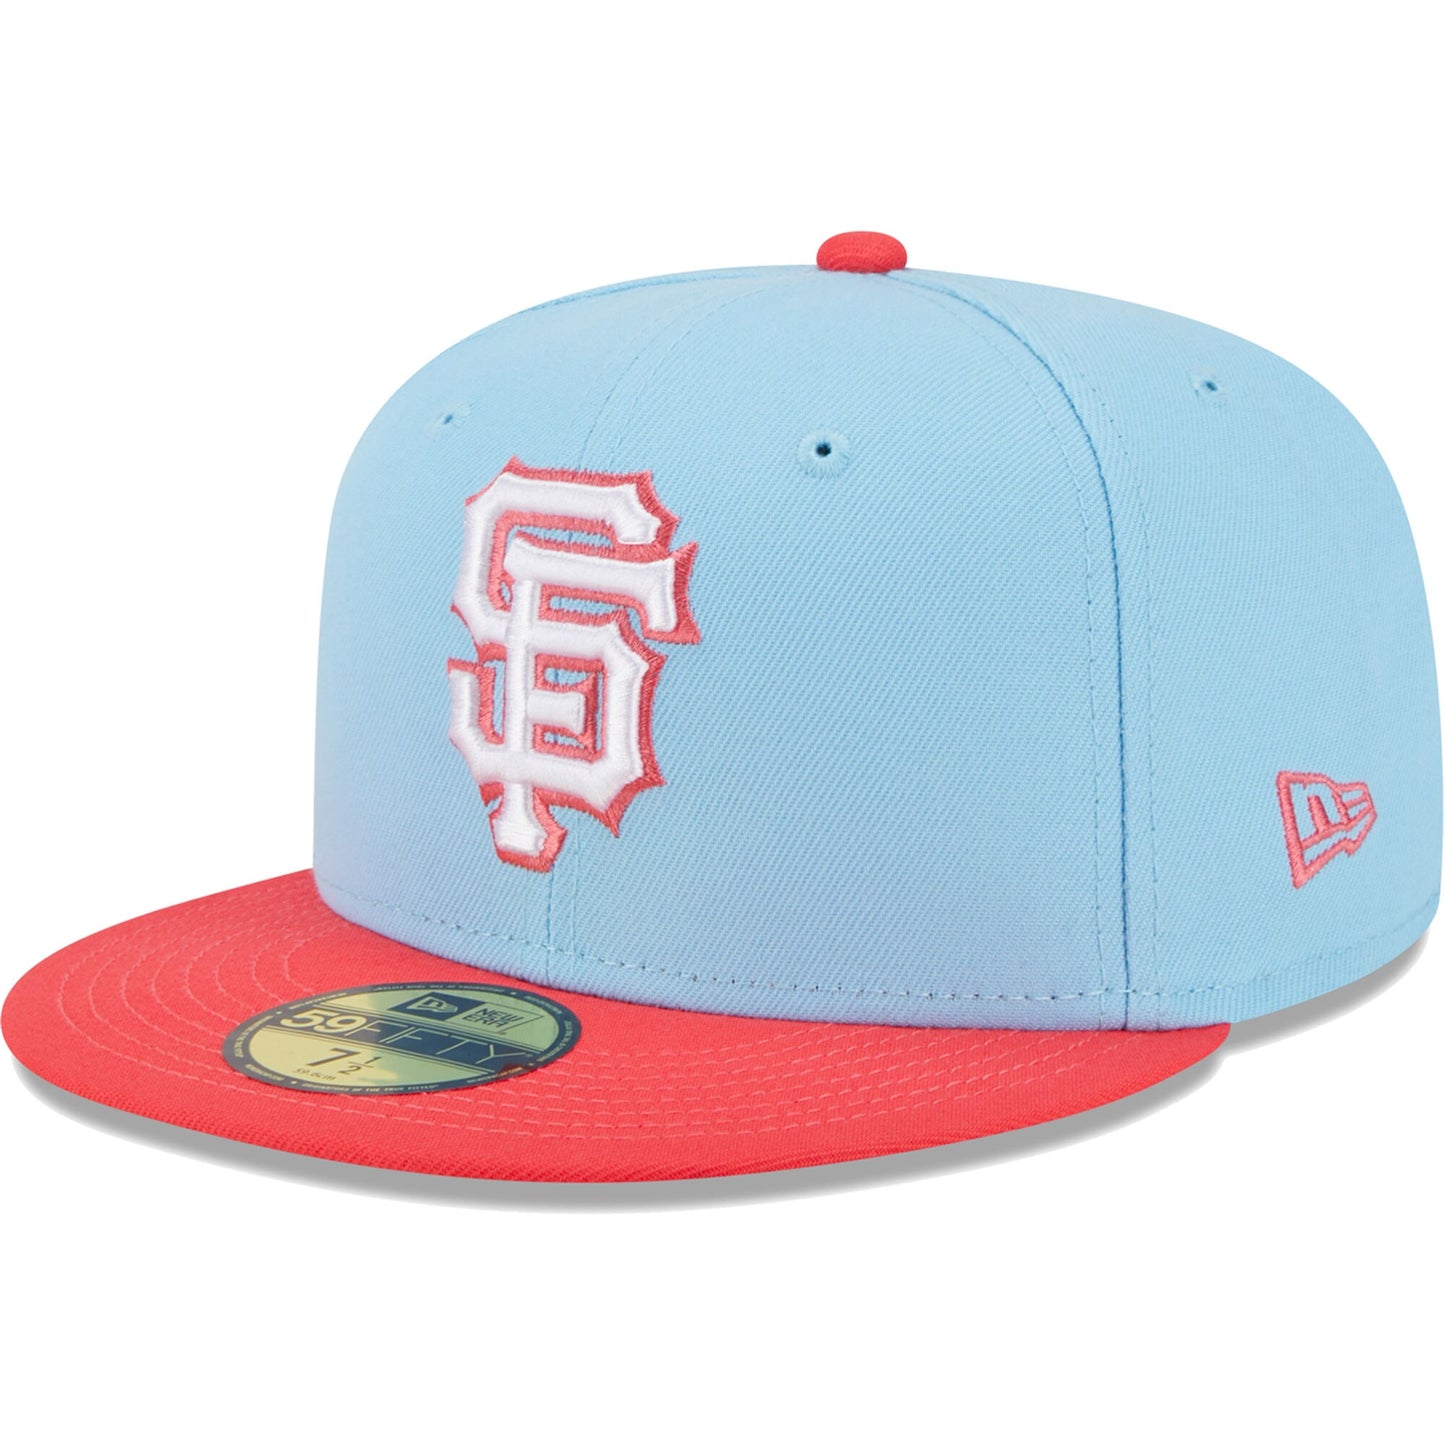 San Francisco Giants New Era Spring Color Two-Tone 59FIFTY Fitted Hat - Light Blue/Red